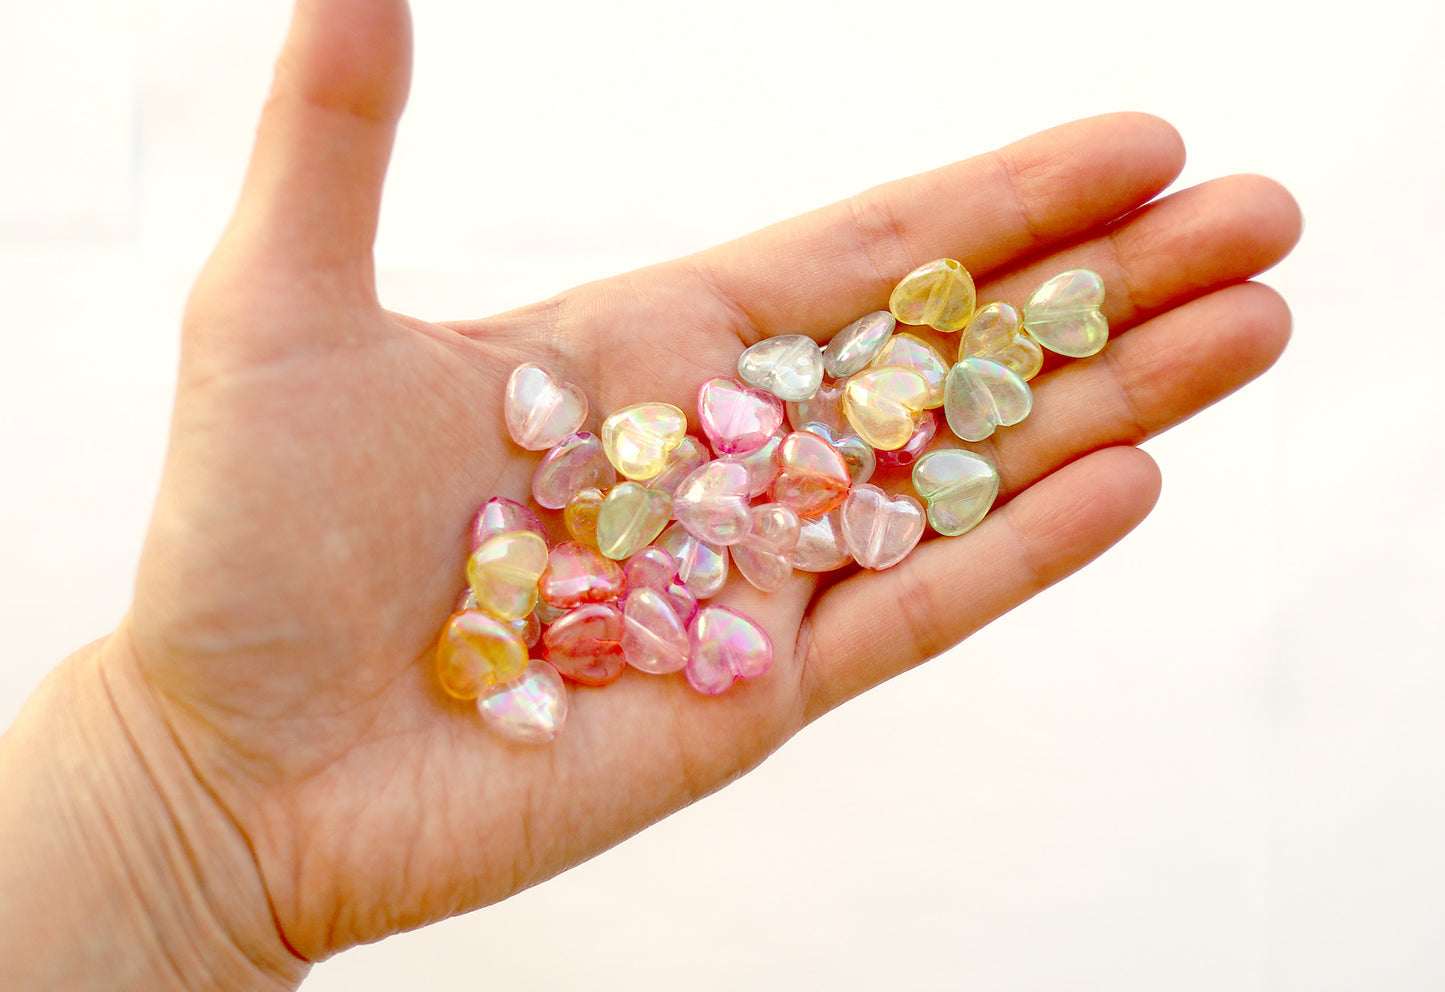 Heart Beads - 11mm AB Transparent Iridescent Puffy Heart Acrylic or Resin Beads - 100 pcs set